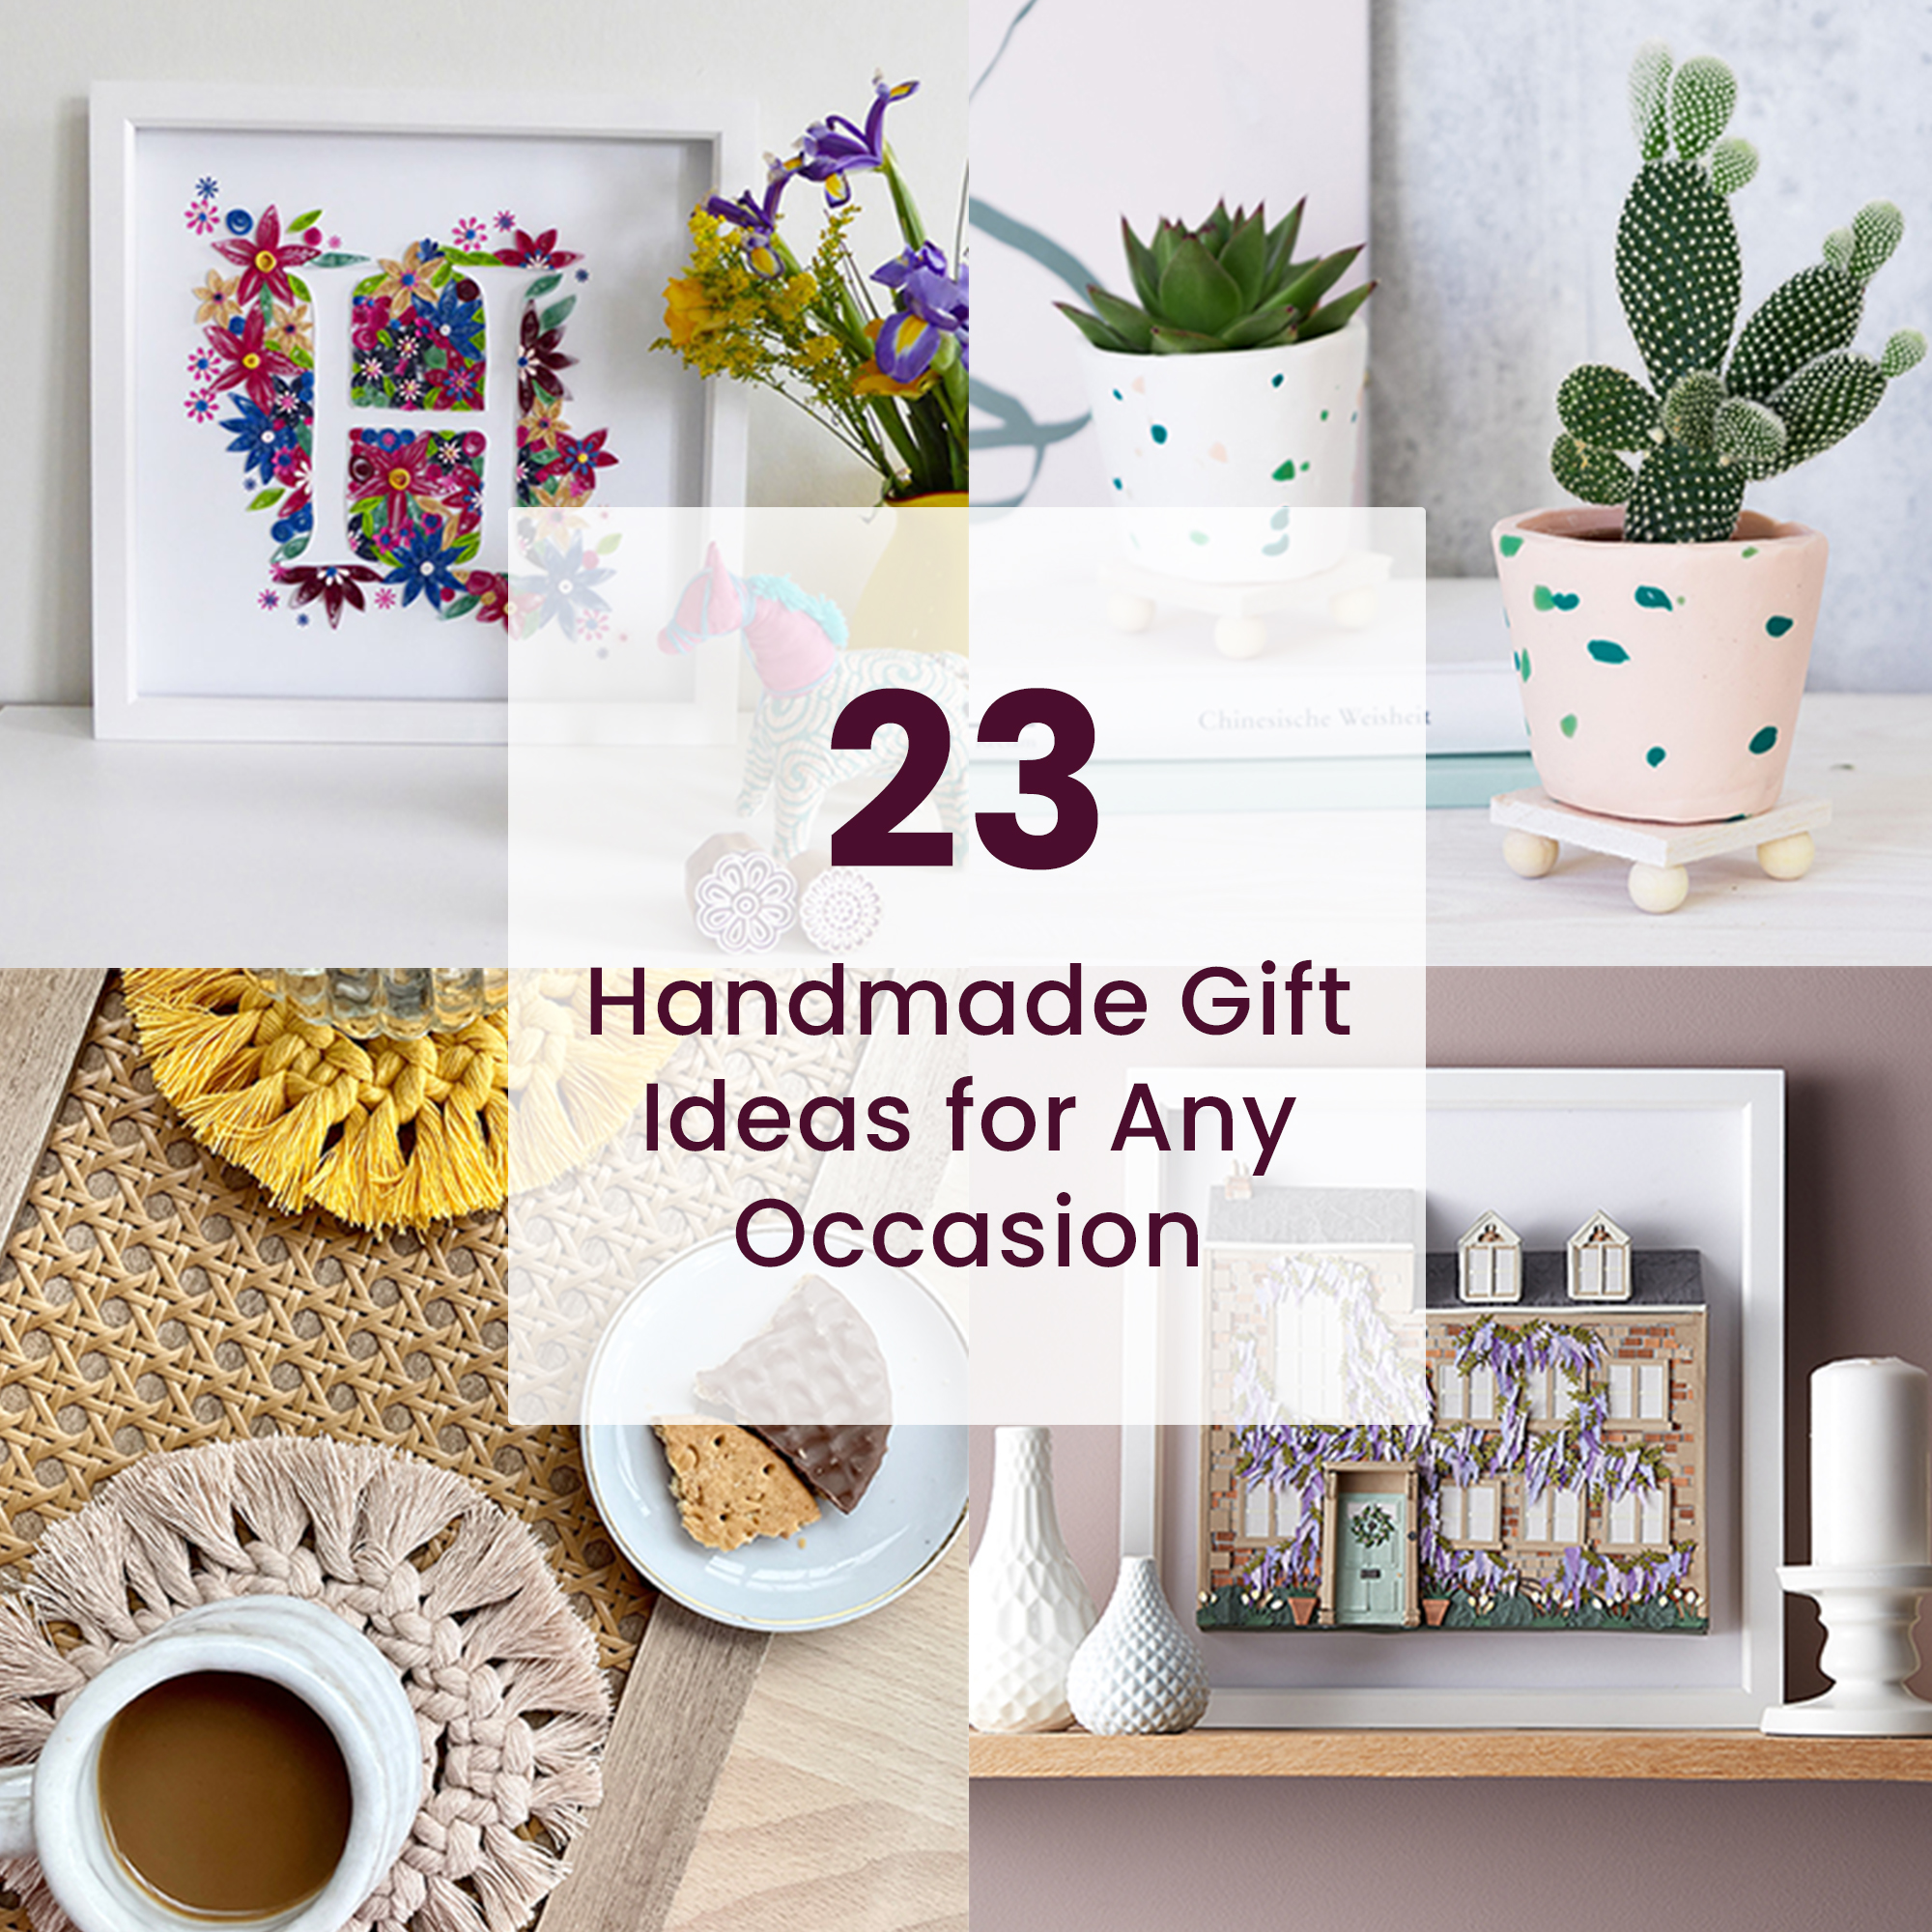 Handmade Gifts Ideas For Different Occasions & Recipients